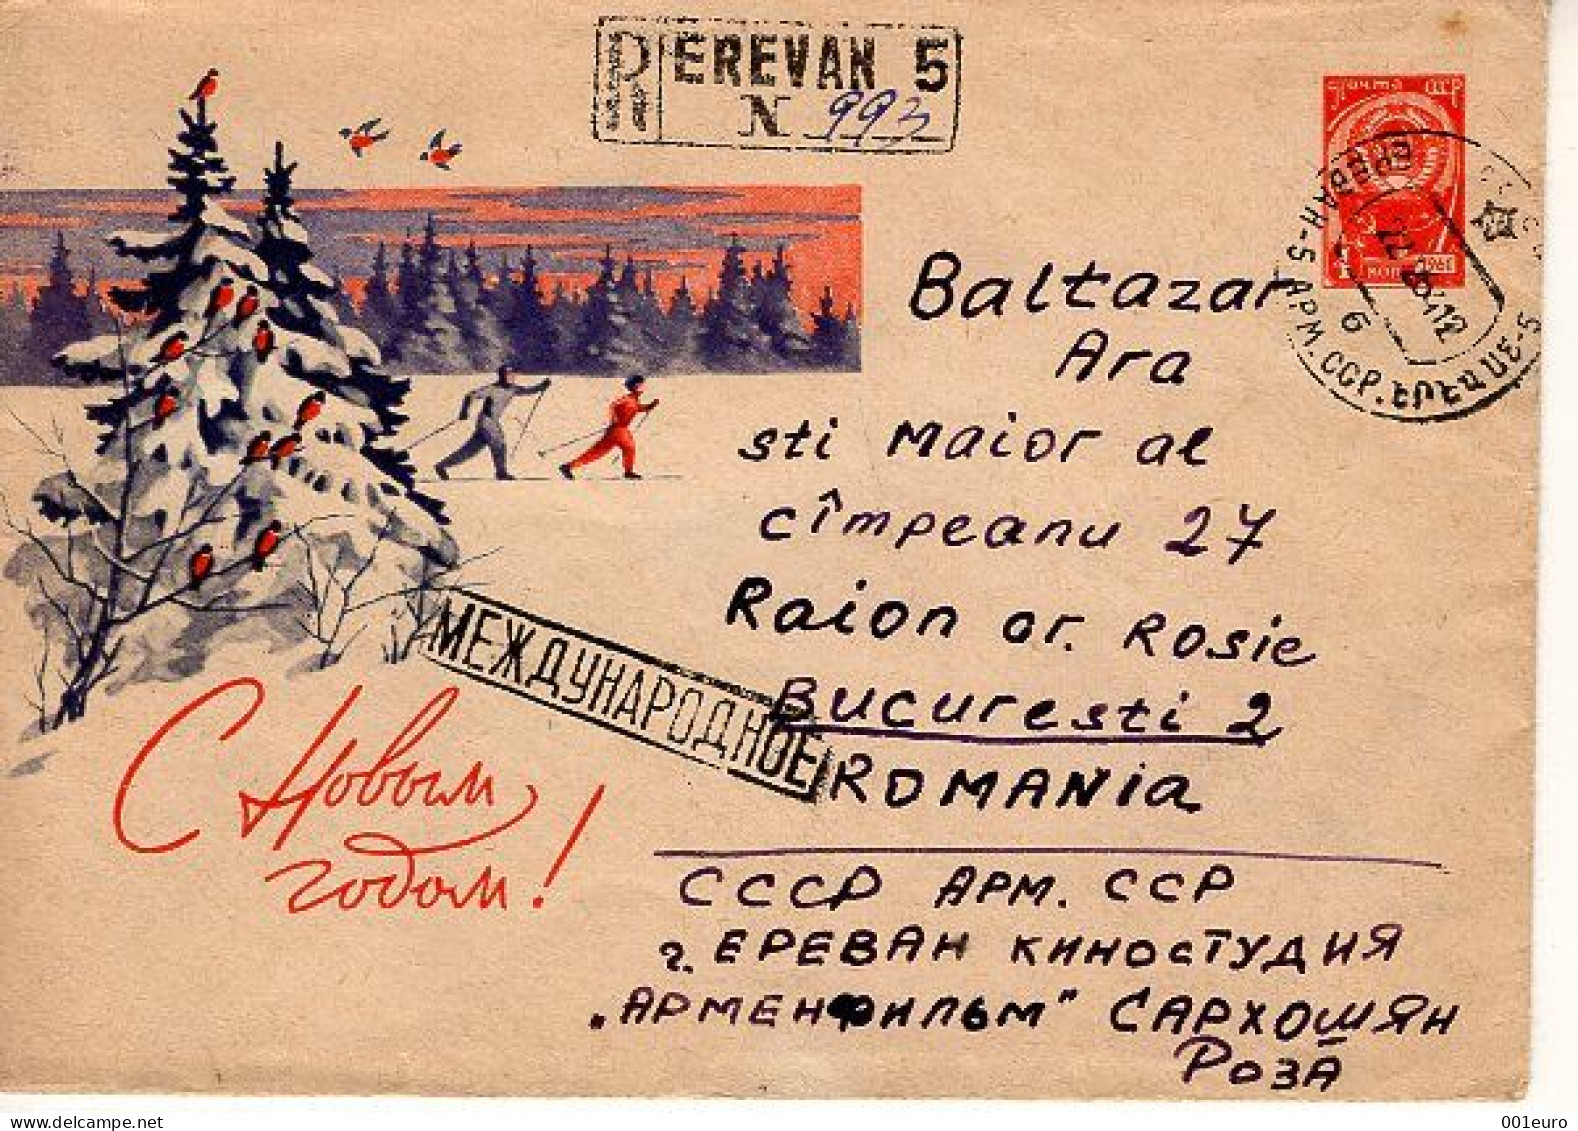 RUSSIA [USSR]: 1963 WINTER LANDSCAPE - SKIING Used Postal Stationery Cover - Registered Shipping! - 1960-69